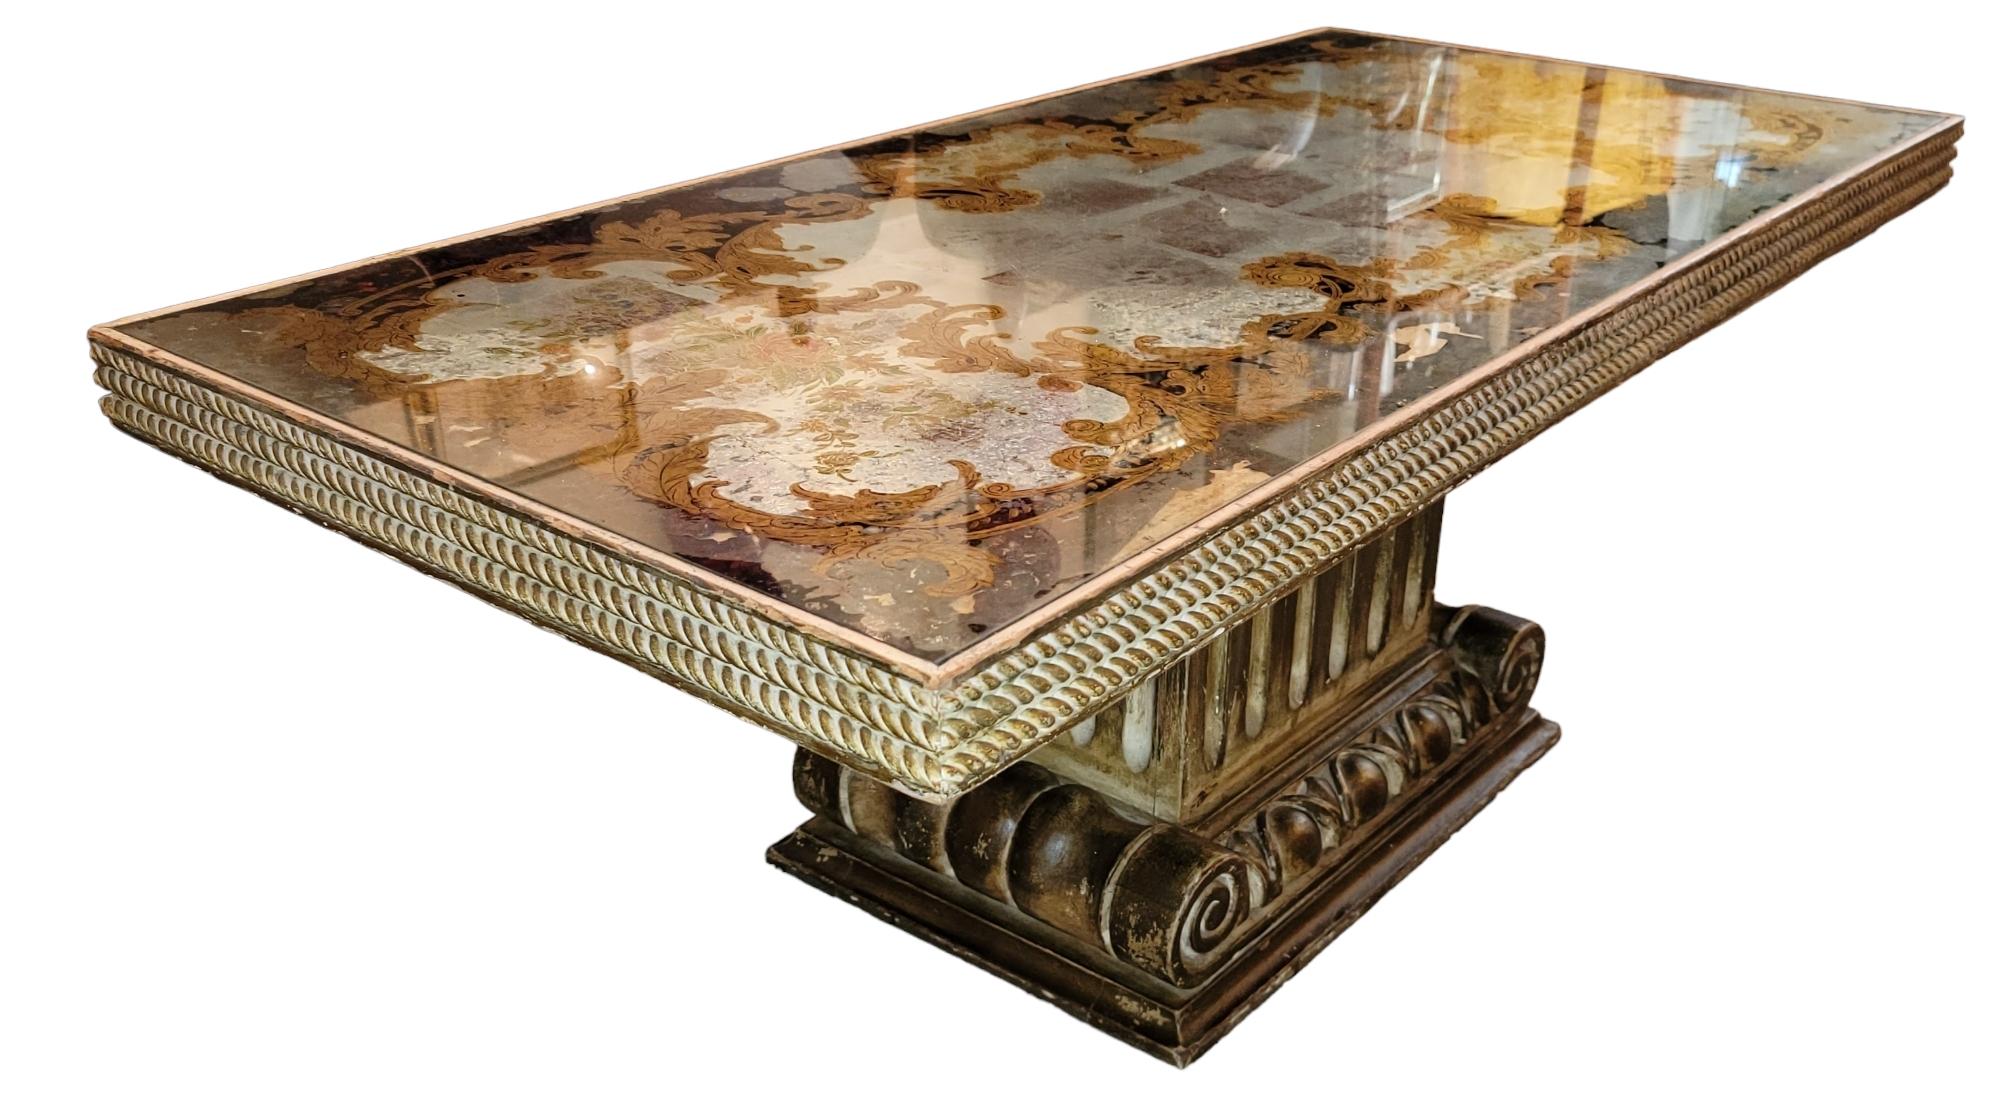 1940s Italian reverse painted glass gilt wood coffe table. measures approx - 23d x 47w x 18h